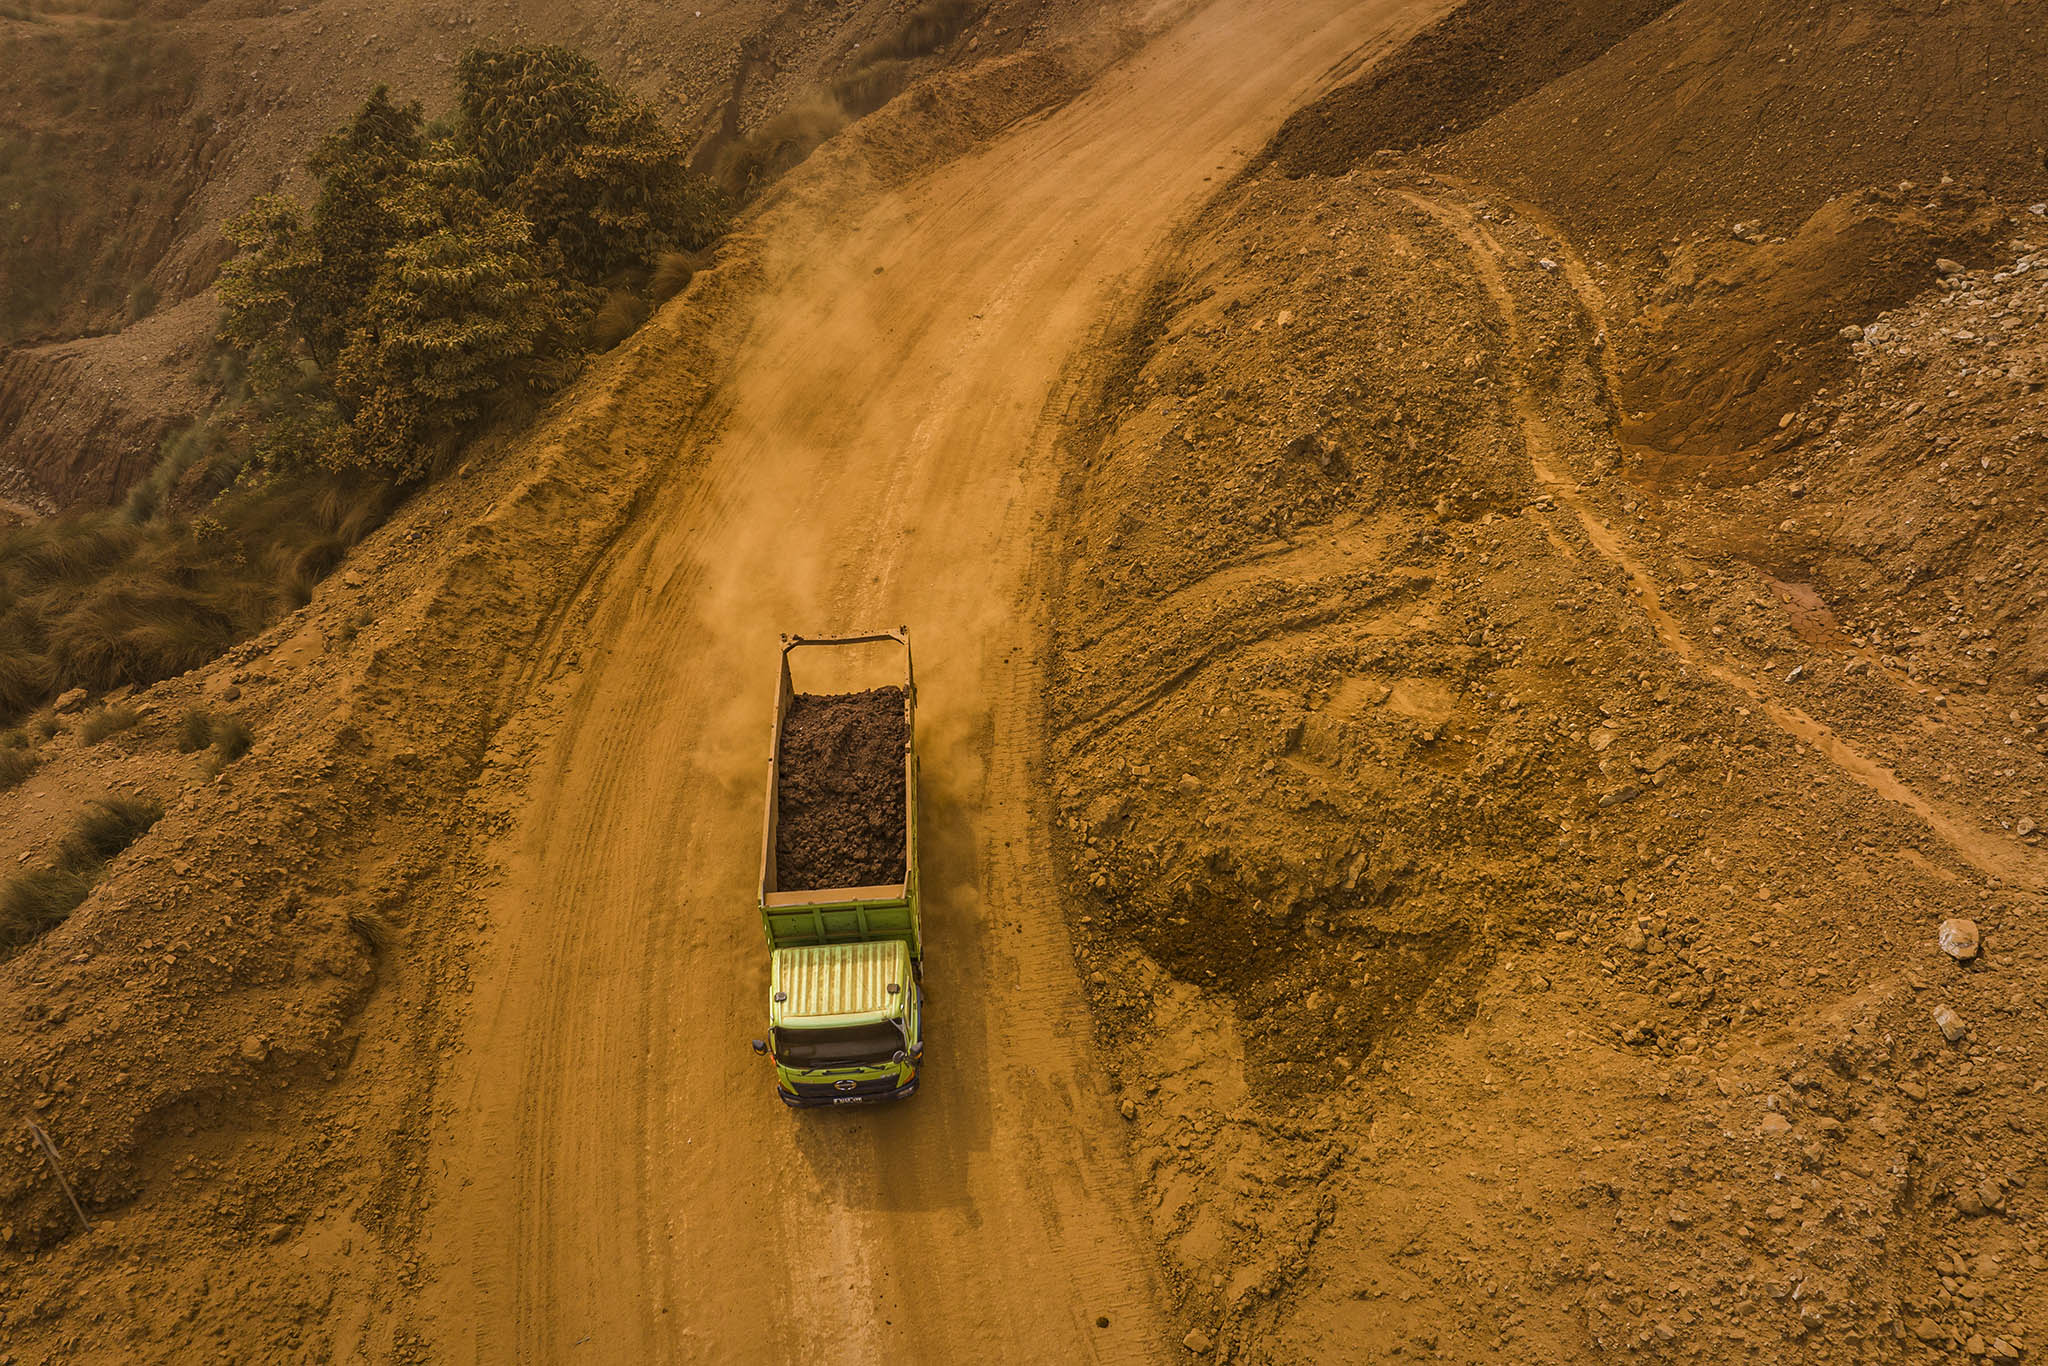 A truck carries nickel ore at a mining site in North Konawe, on the Indonesian island of Sulawesi, July 23, 2023. The fate of Indonesia’s nickel is caught in the conflict between the United States and China. (Ulet Ifansasti/The New York Times)